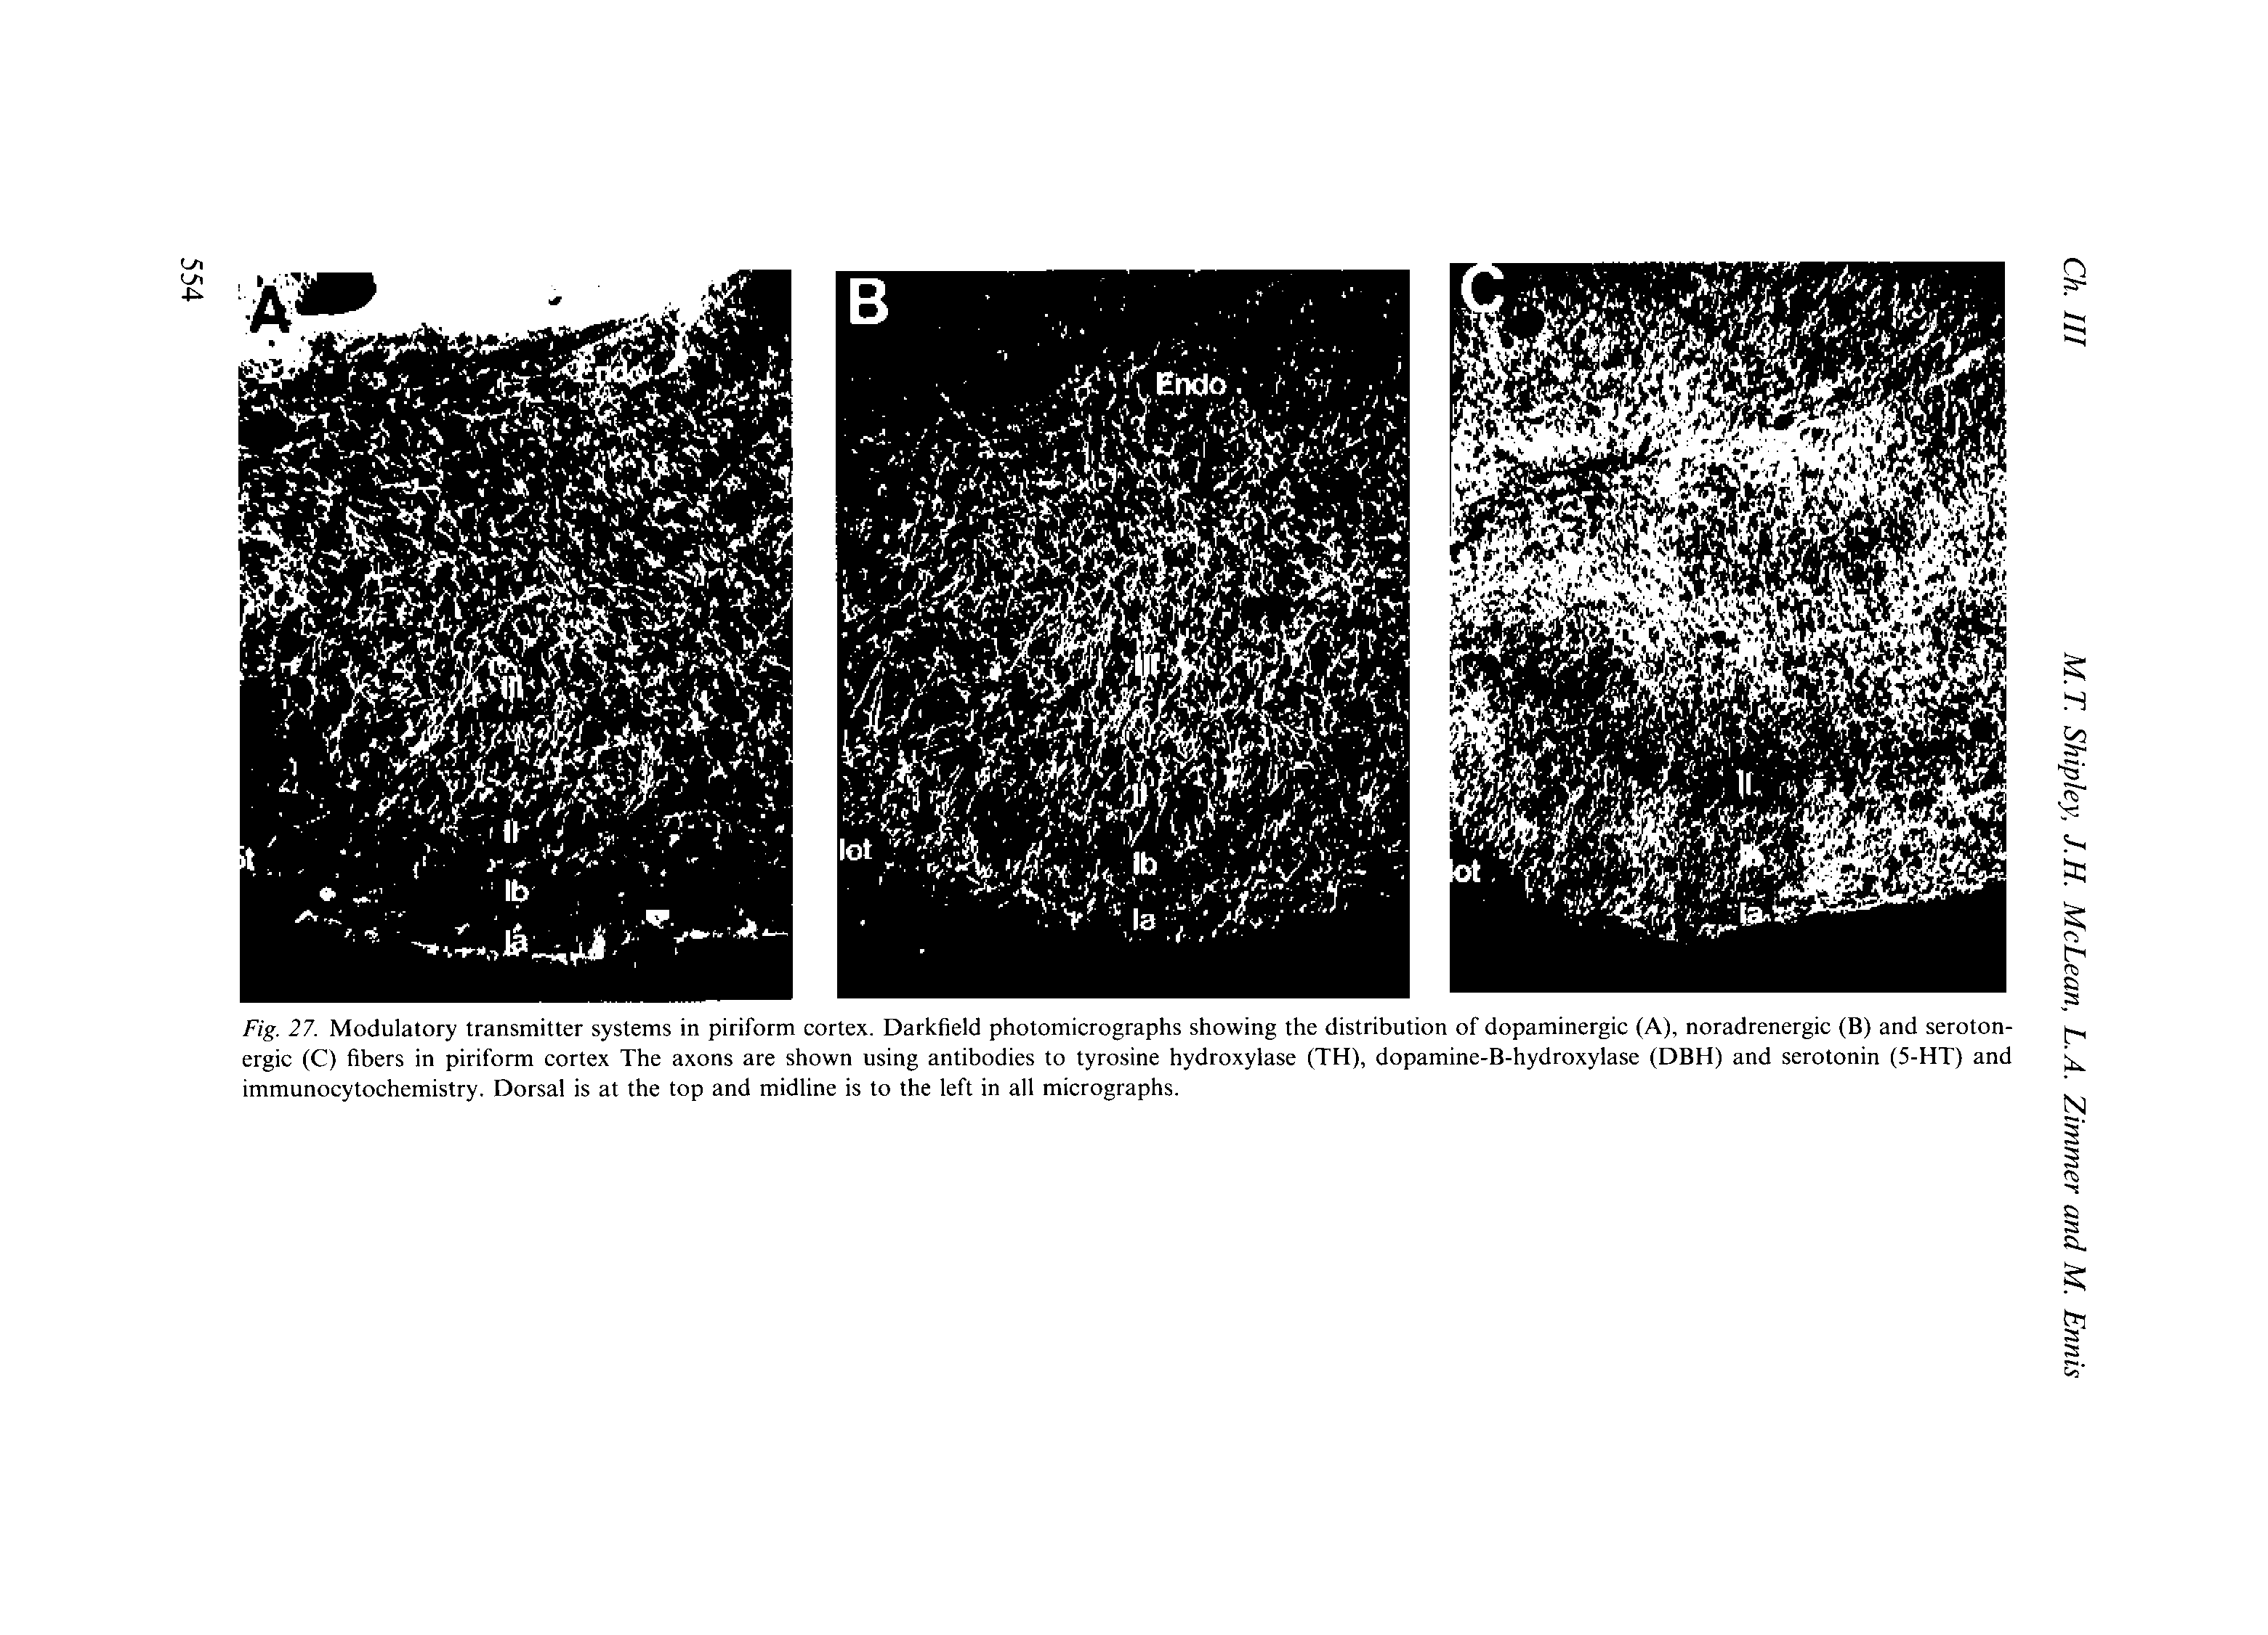 Fig. 27. Modulatory transmitter systems in piriform cortex. Darkfield photomicrographs showing the distribution of dopaminergic (A), noradrenergic (B) and serotonergic (C) fibers in piriform cortex The axons are shown using antibodies to tyrosine hydroxylase (TH), dopamine-B-hydroxylase (DBH) and serotonin (5-HT) and immunocytochemistry. Dorsal is at the top and midline is to the left in all micrographs.